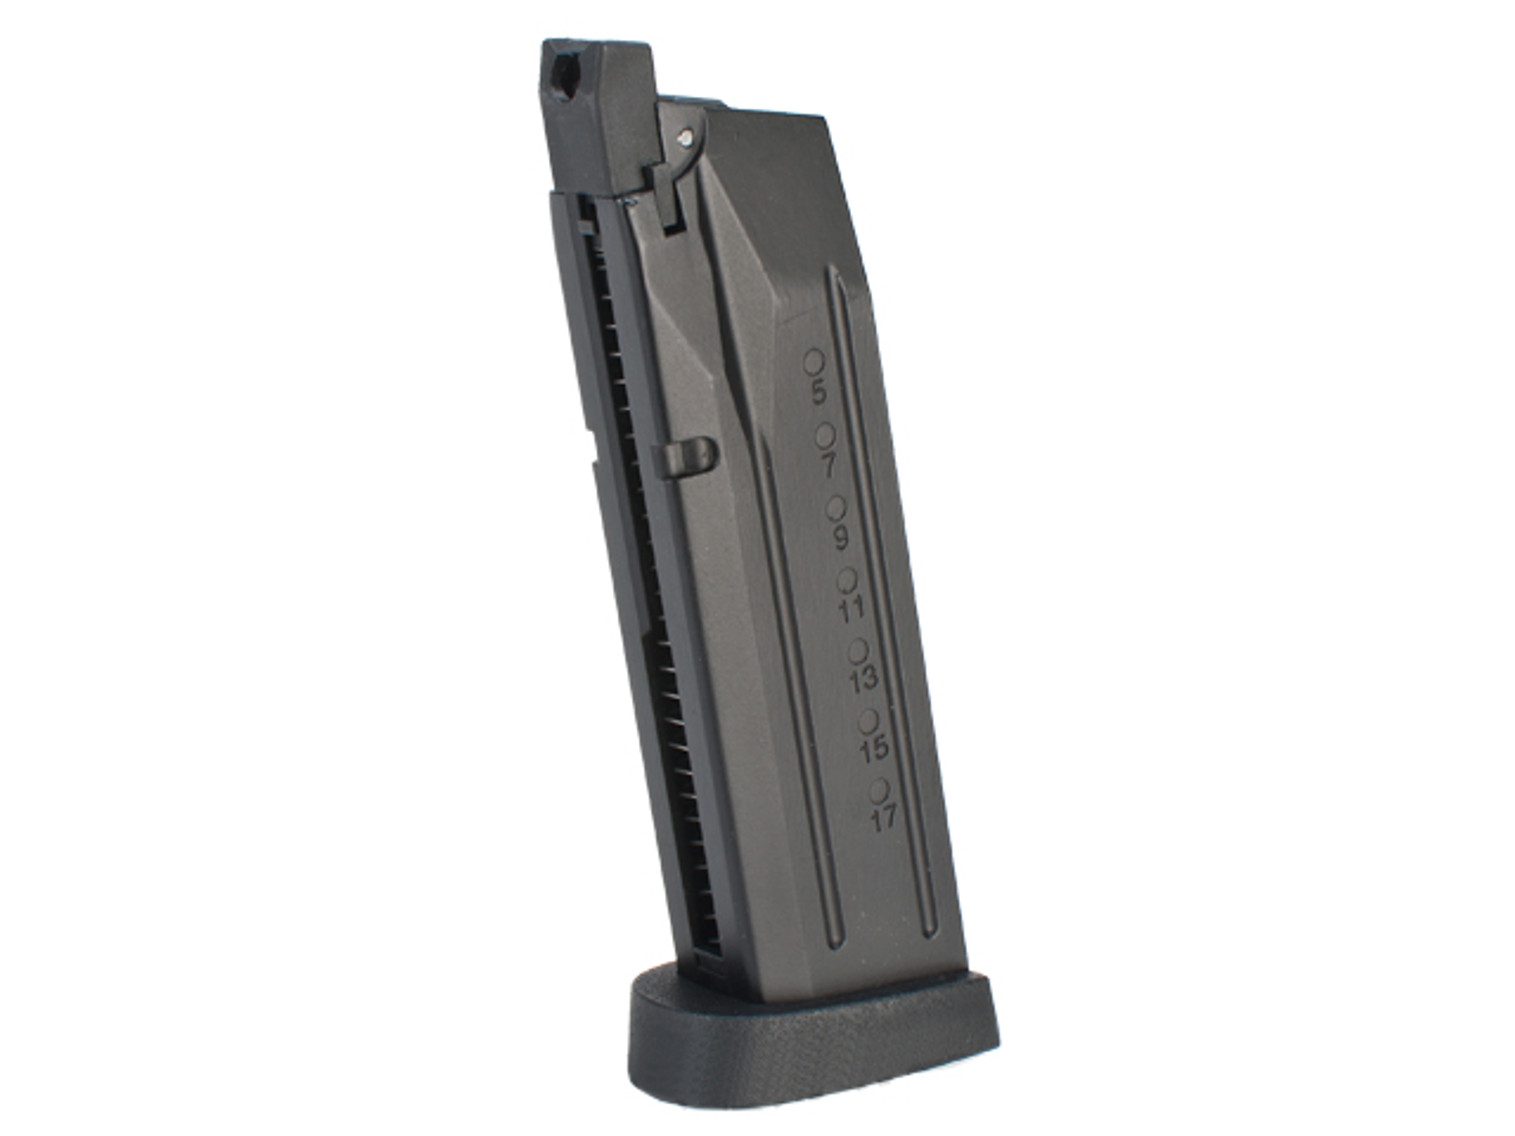 We-Tech 22rd CO2 Magazine for "Big Bird" Series Airsoft GBB Pistols